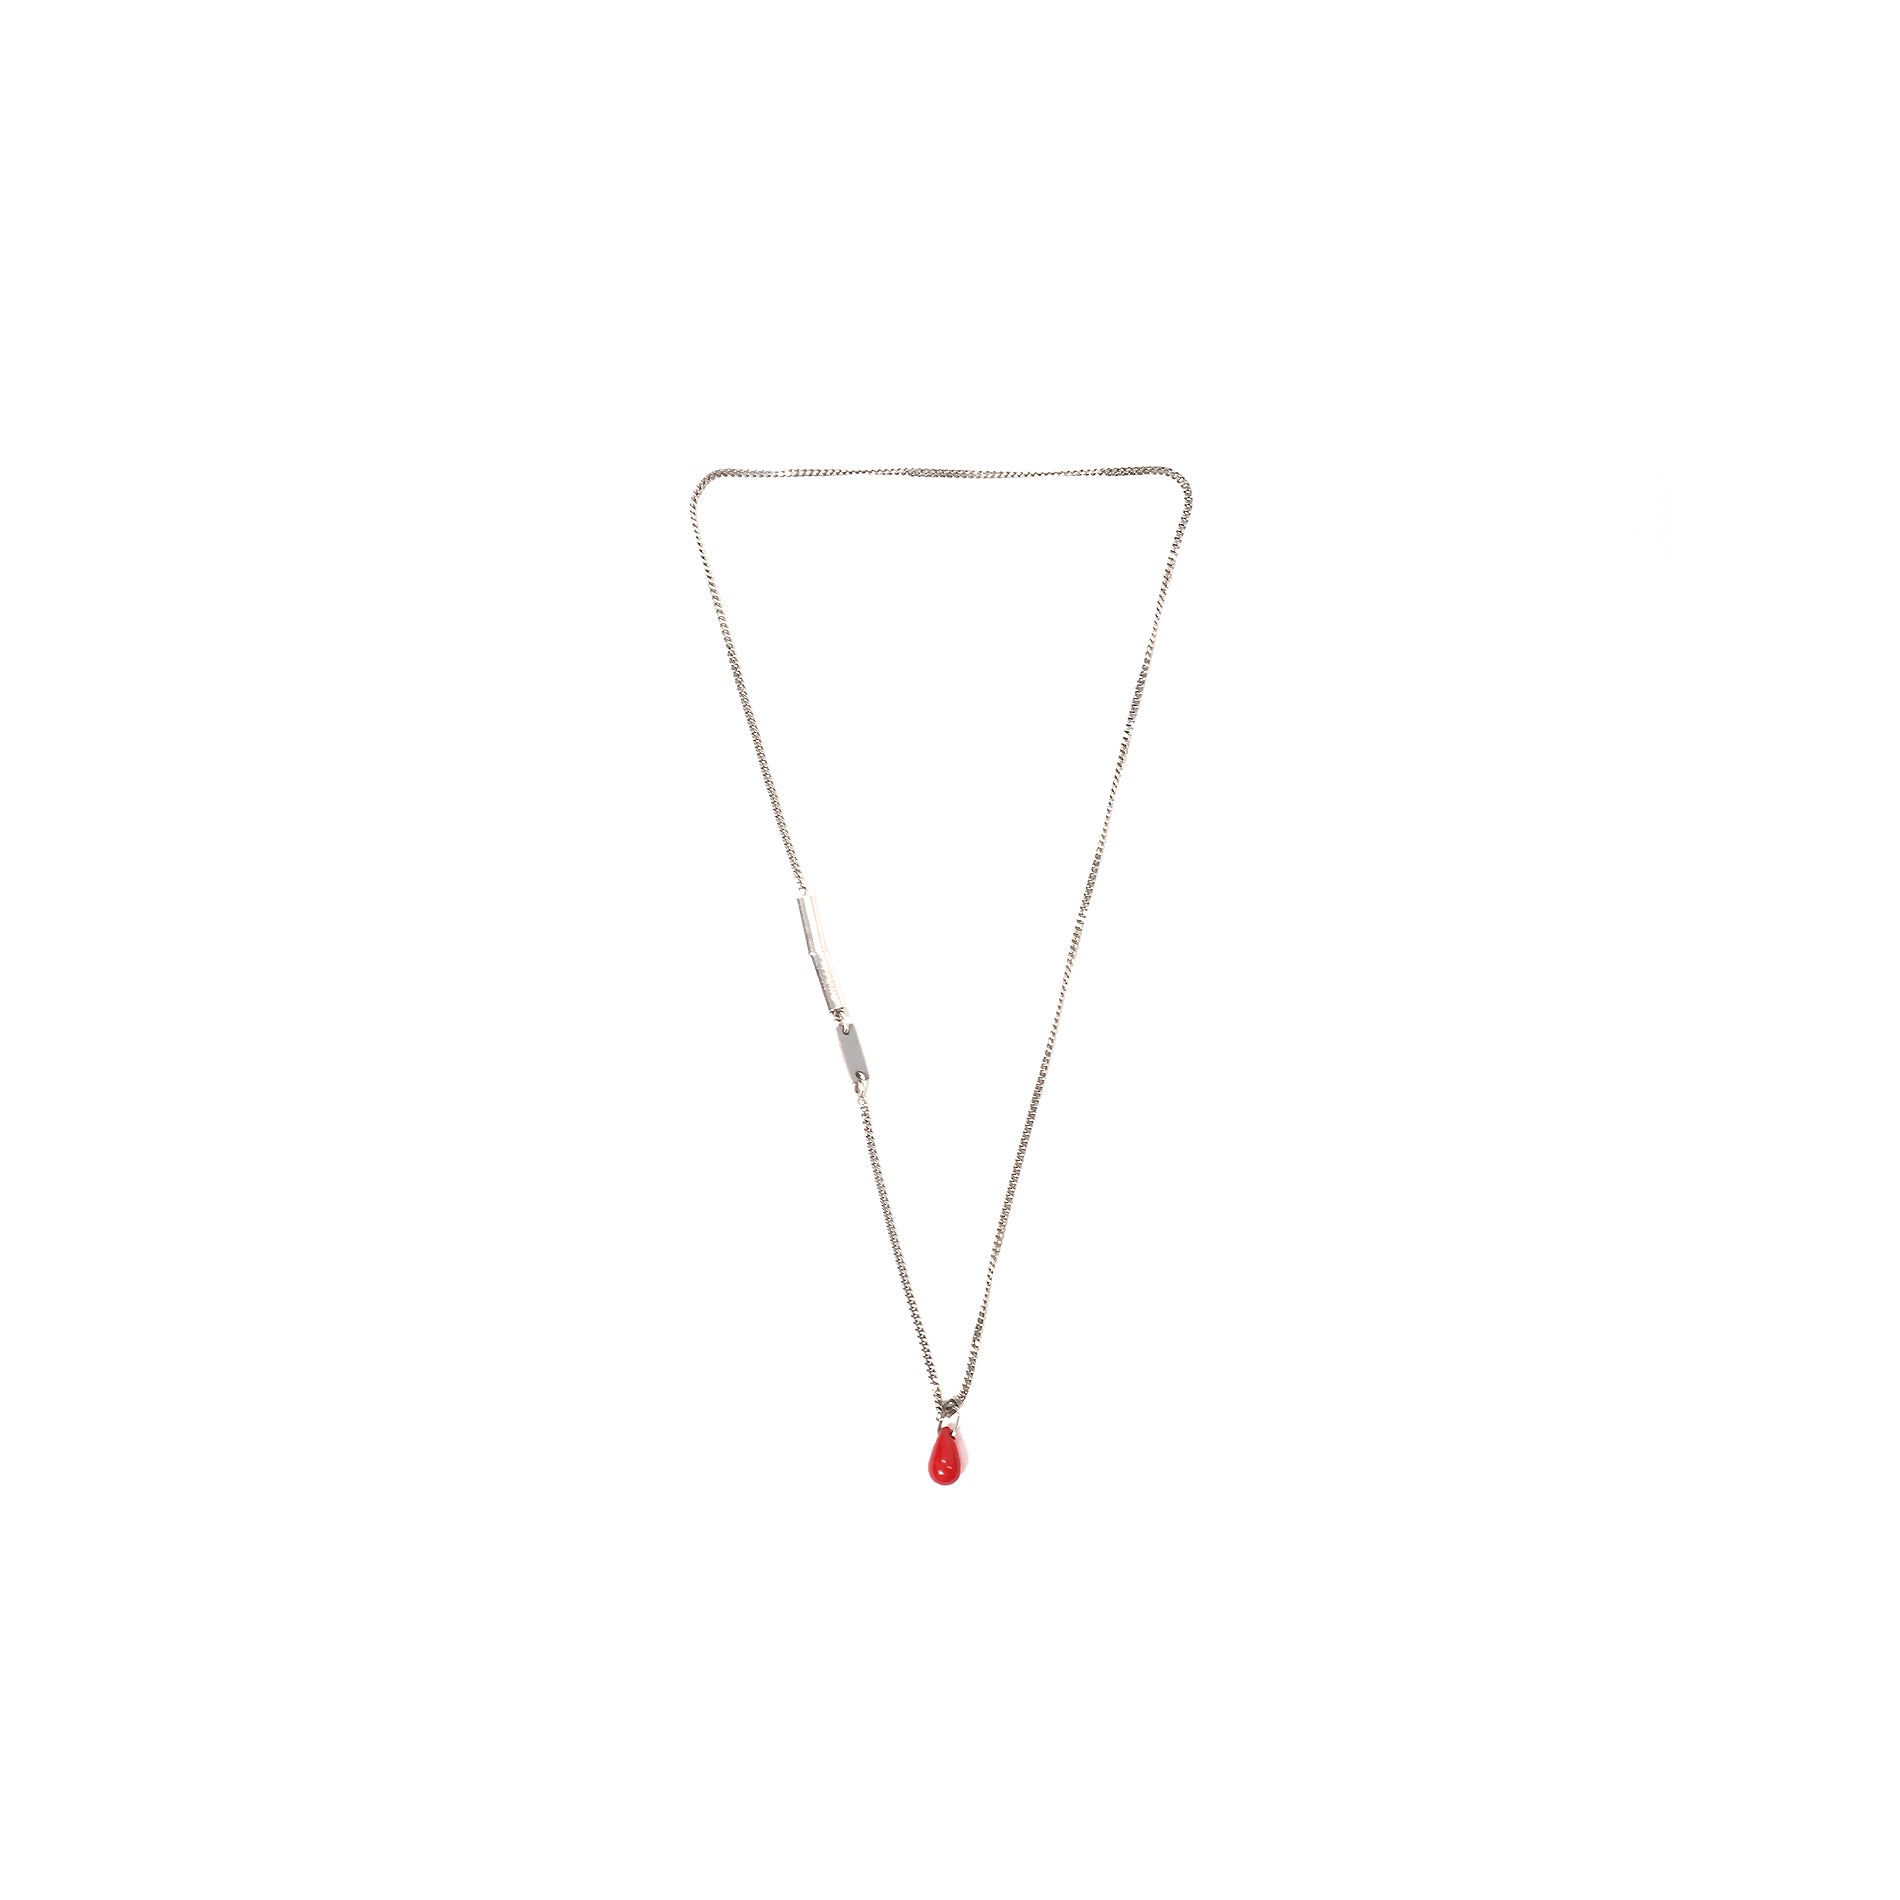 Dior Homme SS02 "Boys Don't Cry/Red" Blood Drip Necklace